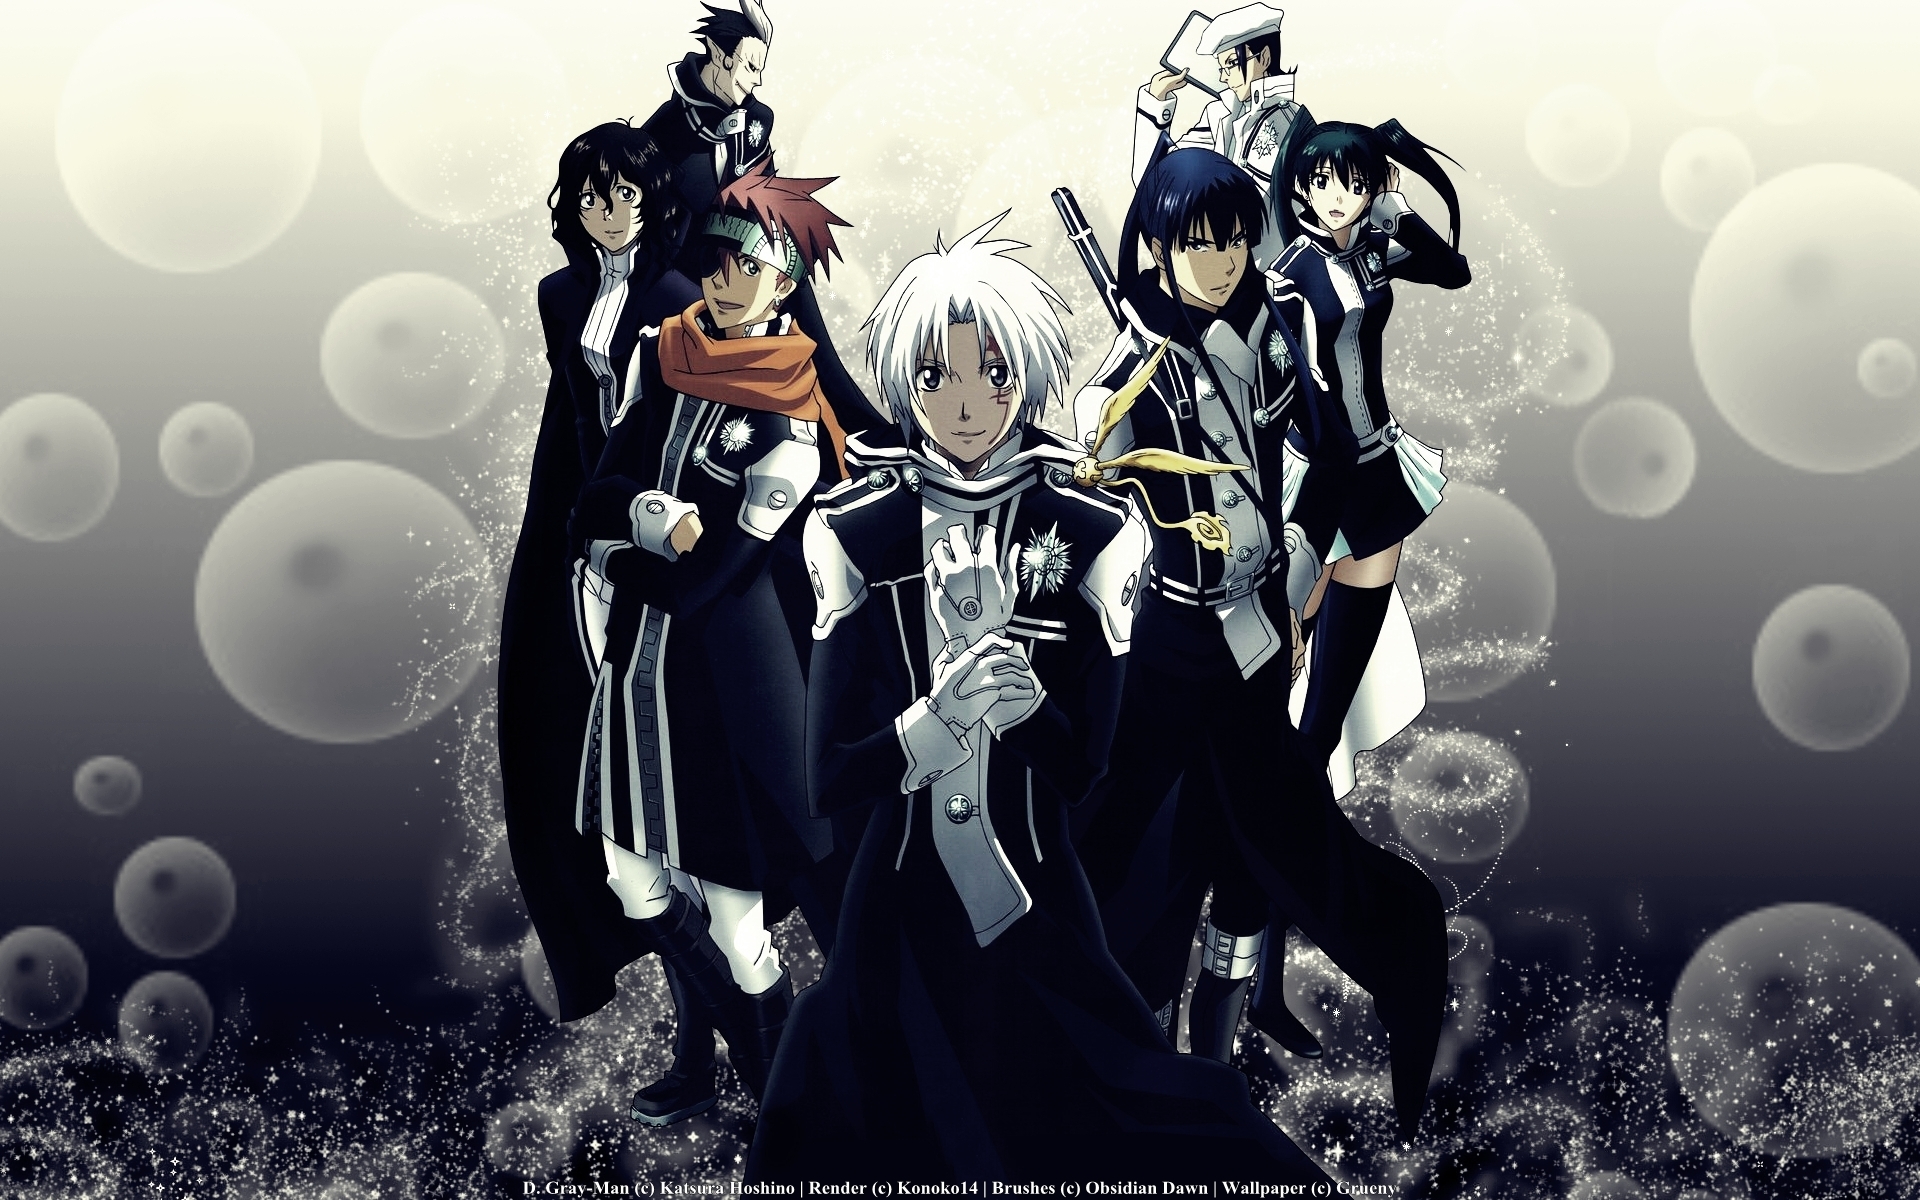 10 Top D.gray-Man Wallpaper FULL HD 1920×1080 For PC Background 2020